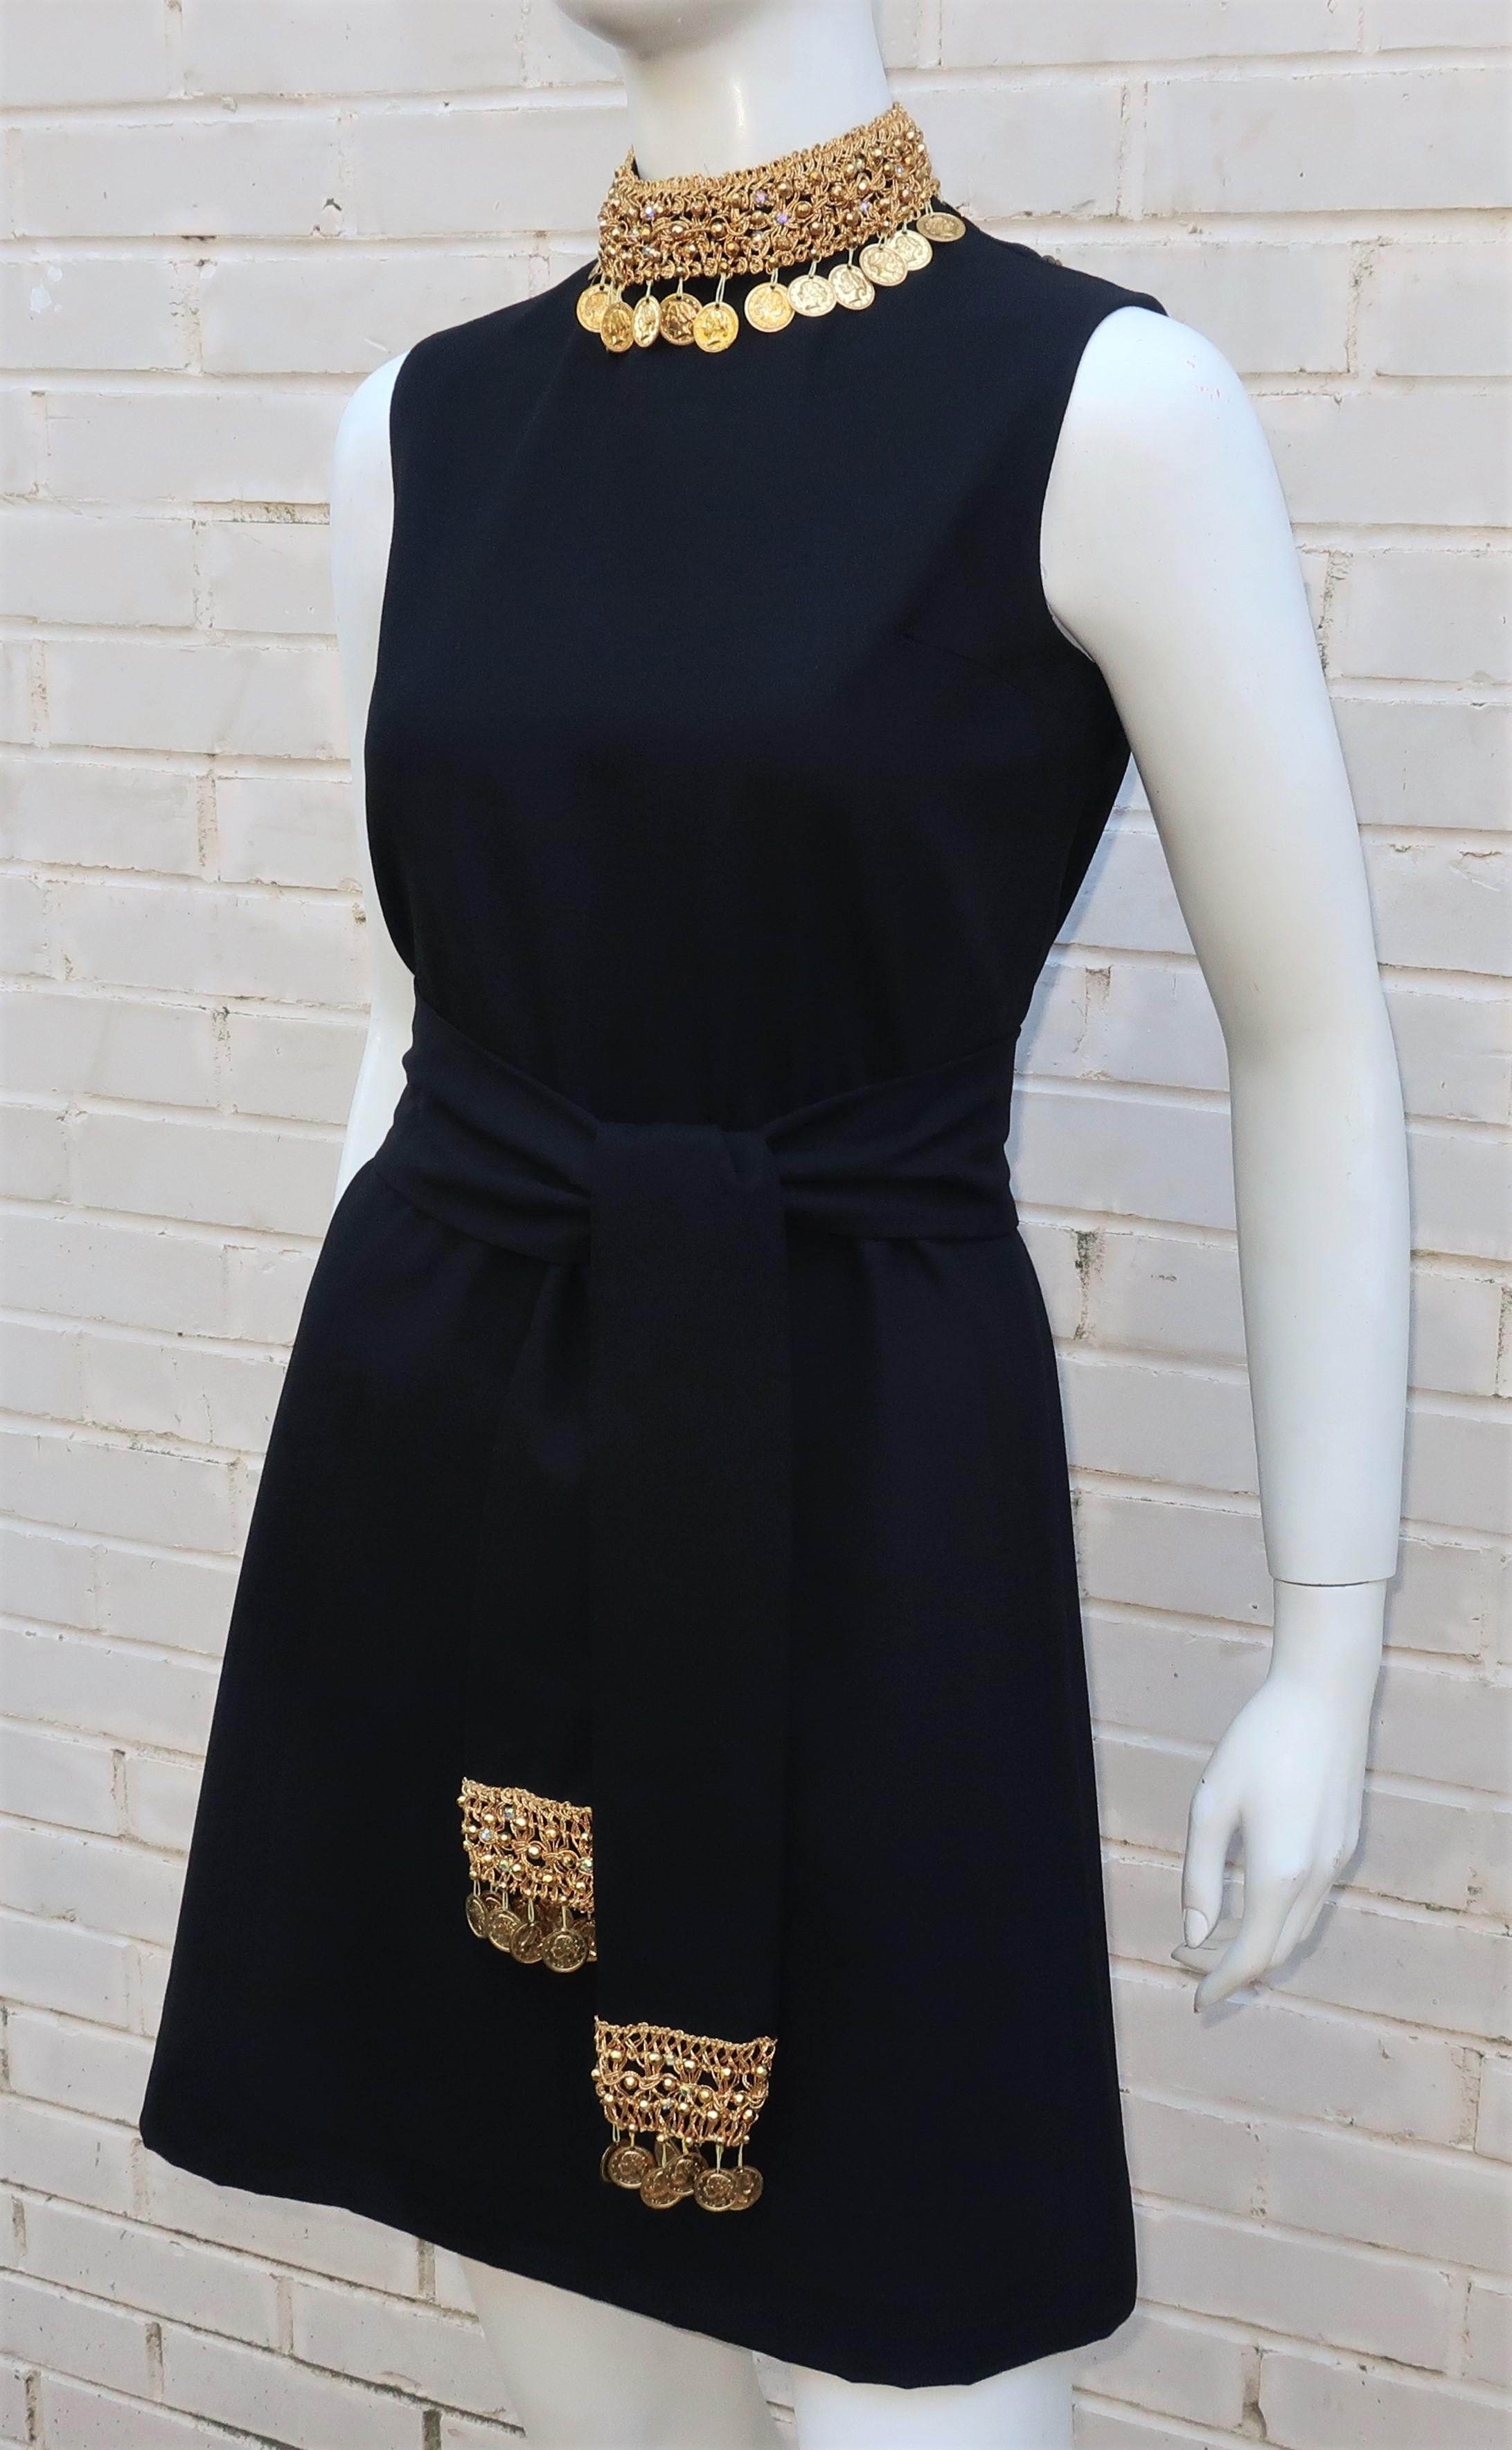 Women's Black Crepe Mini Cocktail Dress With Gold Coins & Beading, 1960's